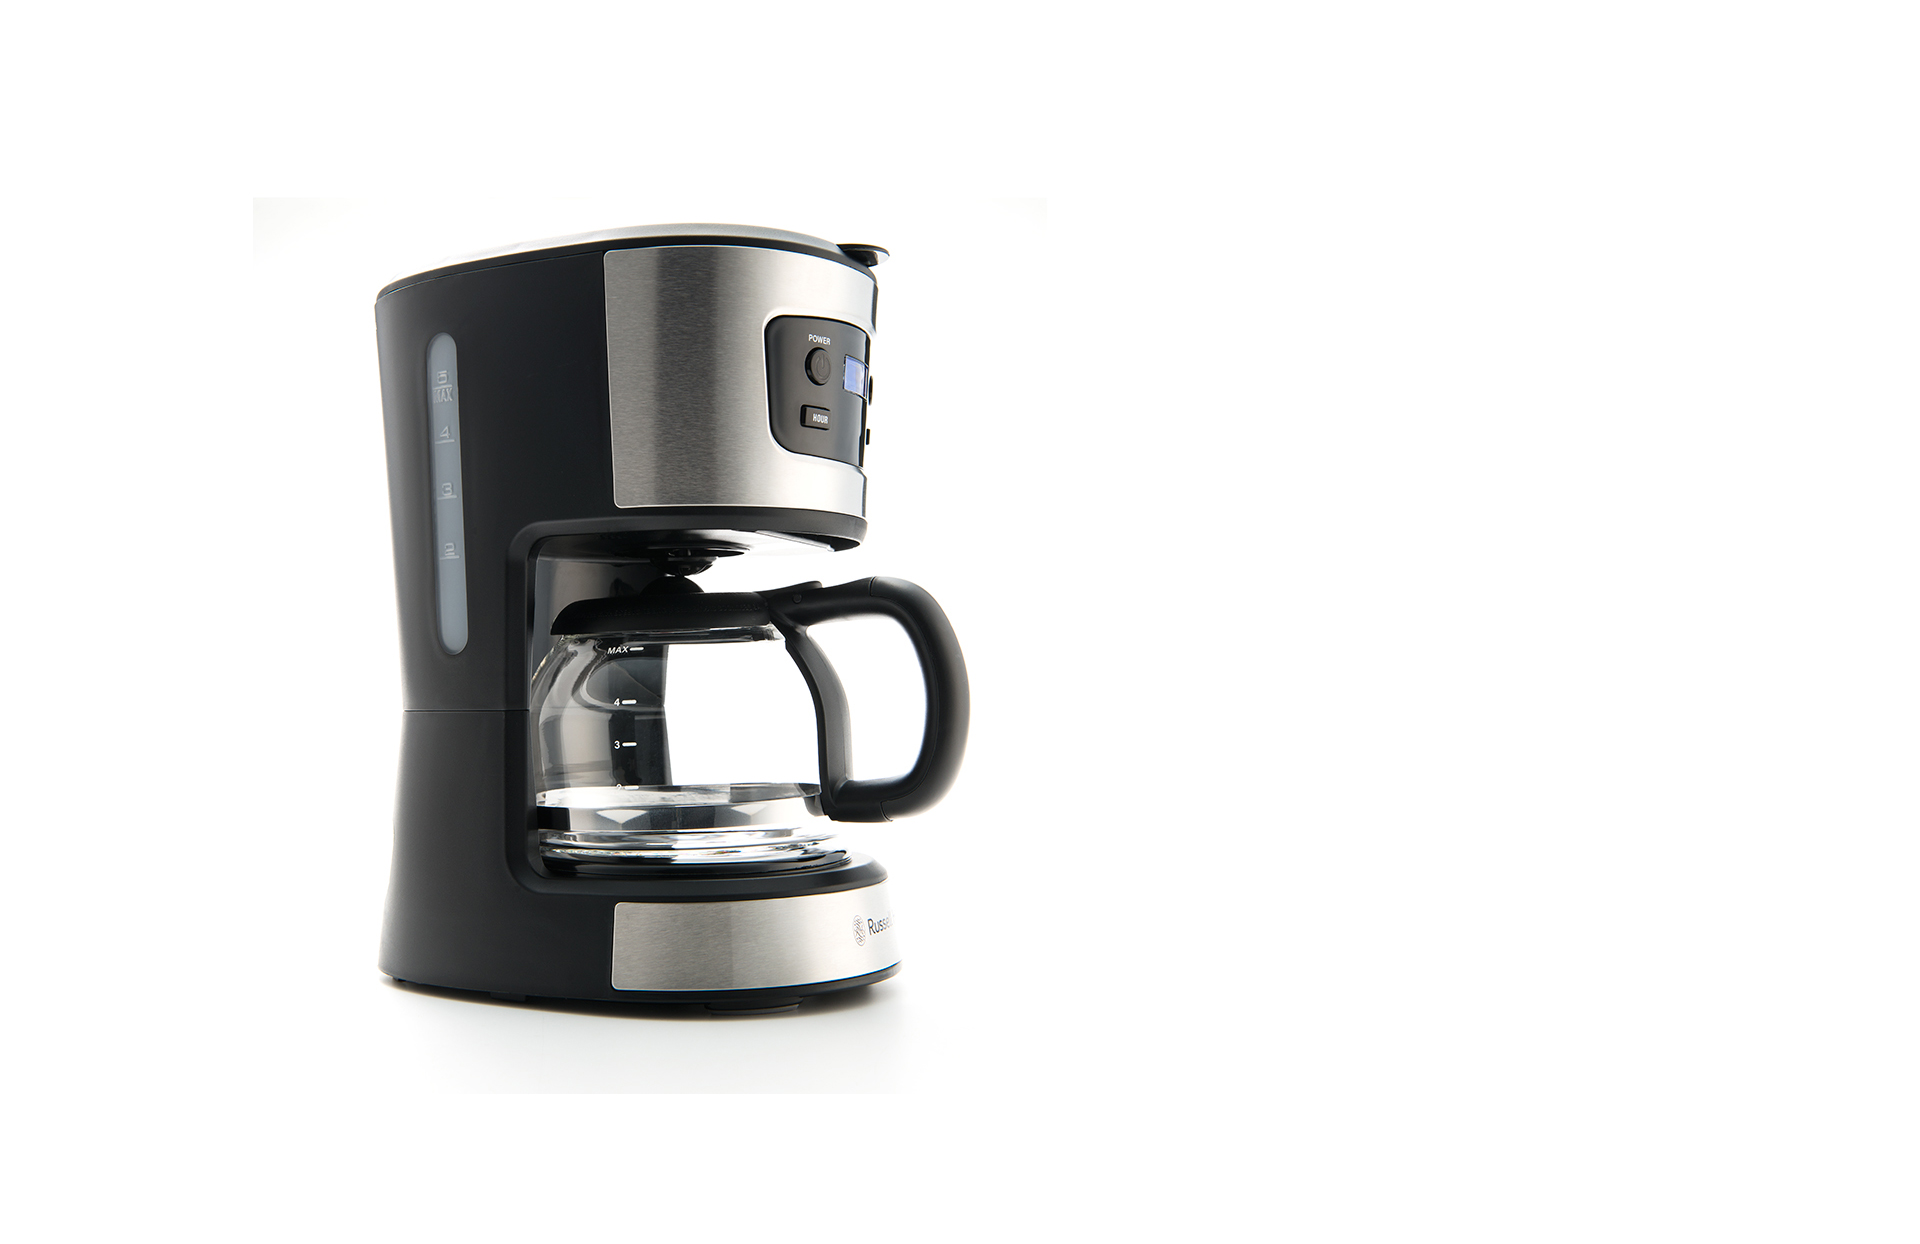 Russell Hobbs 7620JP Coffee Maker, 5 Cups, No Paper Filter Required, Timer, Basic Drip